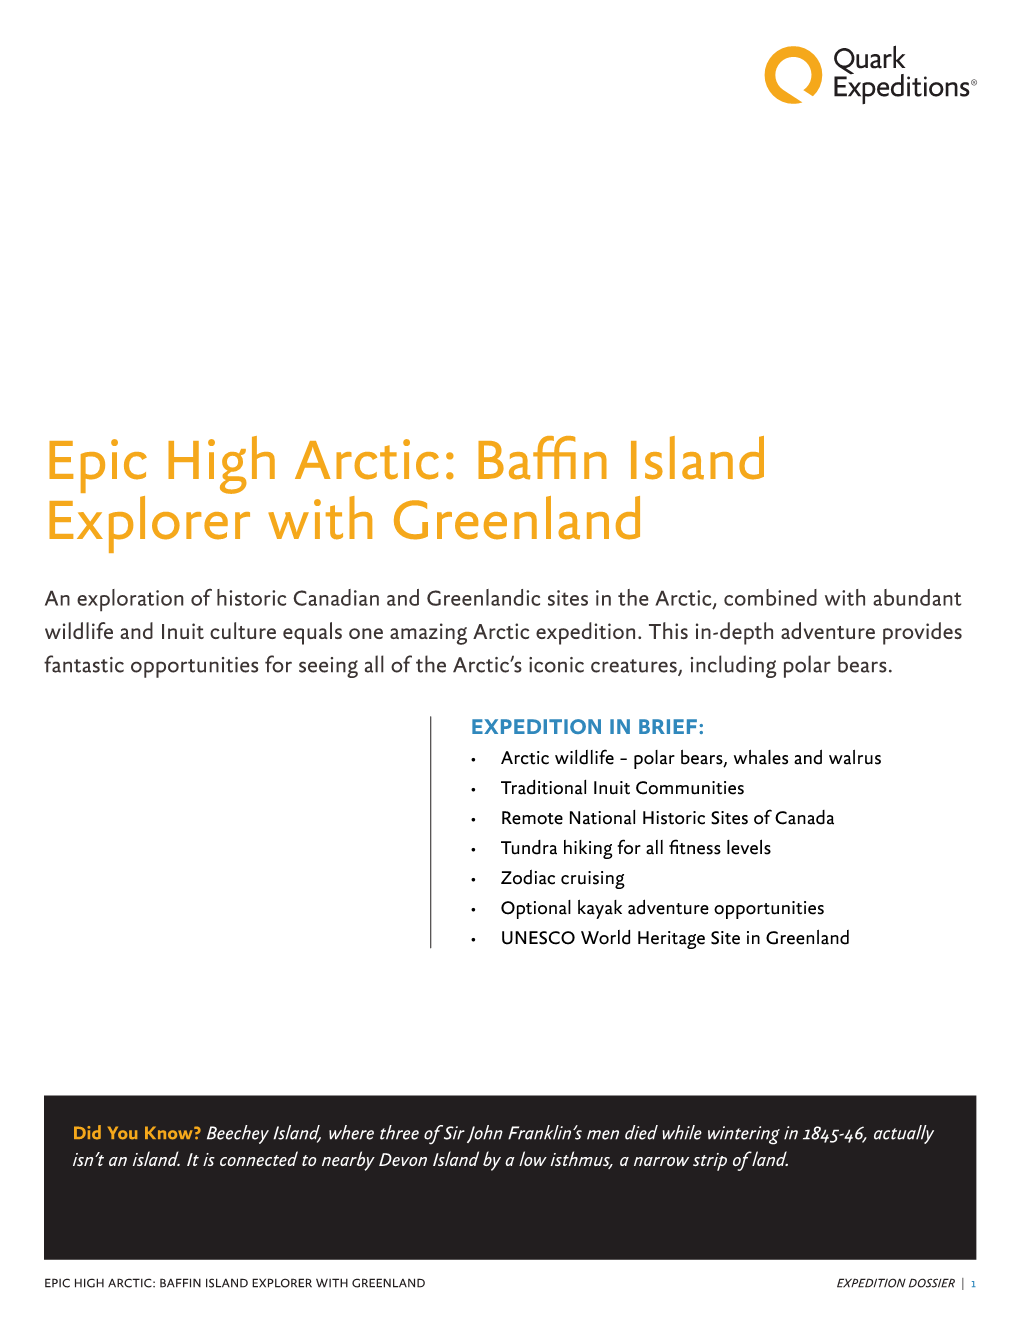 Epic High Arctic: Baffin Island Explorer with Greenland